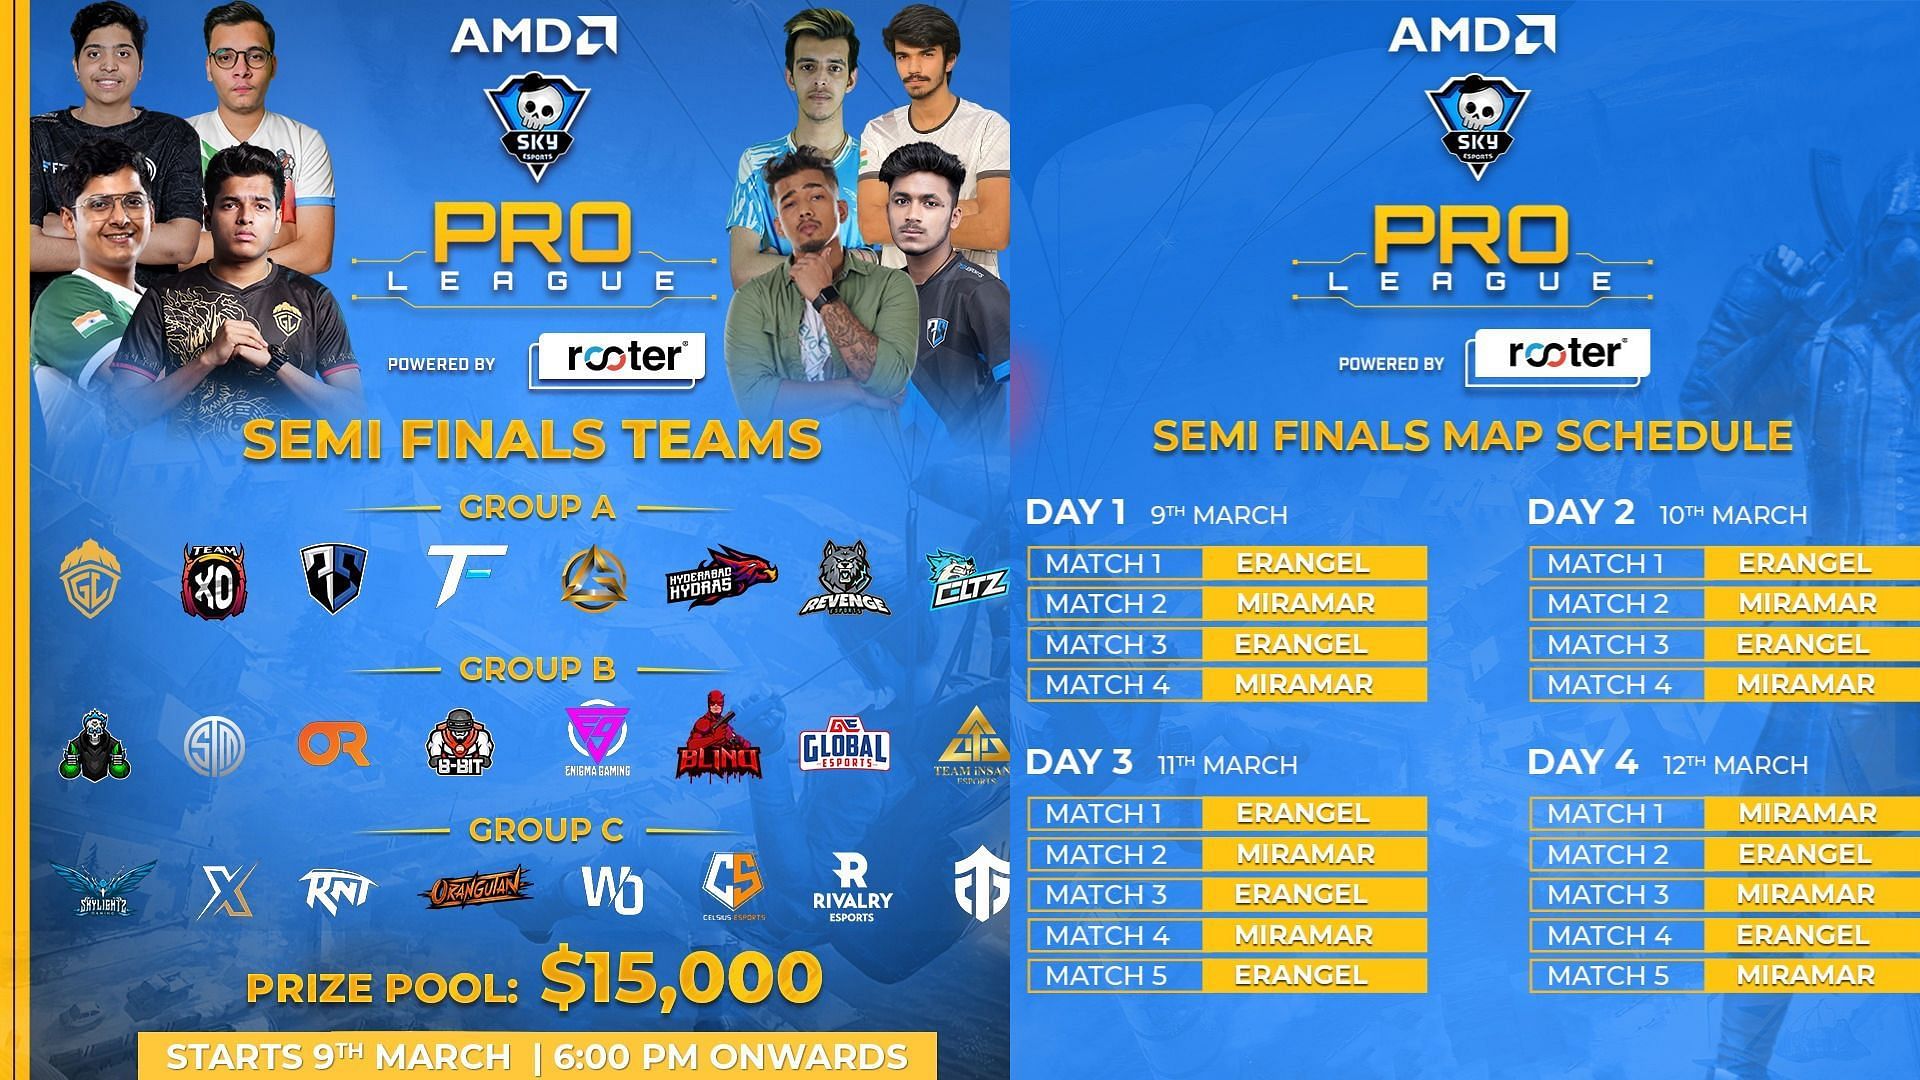 Skyesports BGMI Pro League teams and schedule revealed (Image via Skyesports)